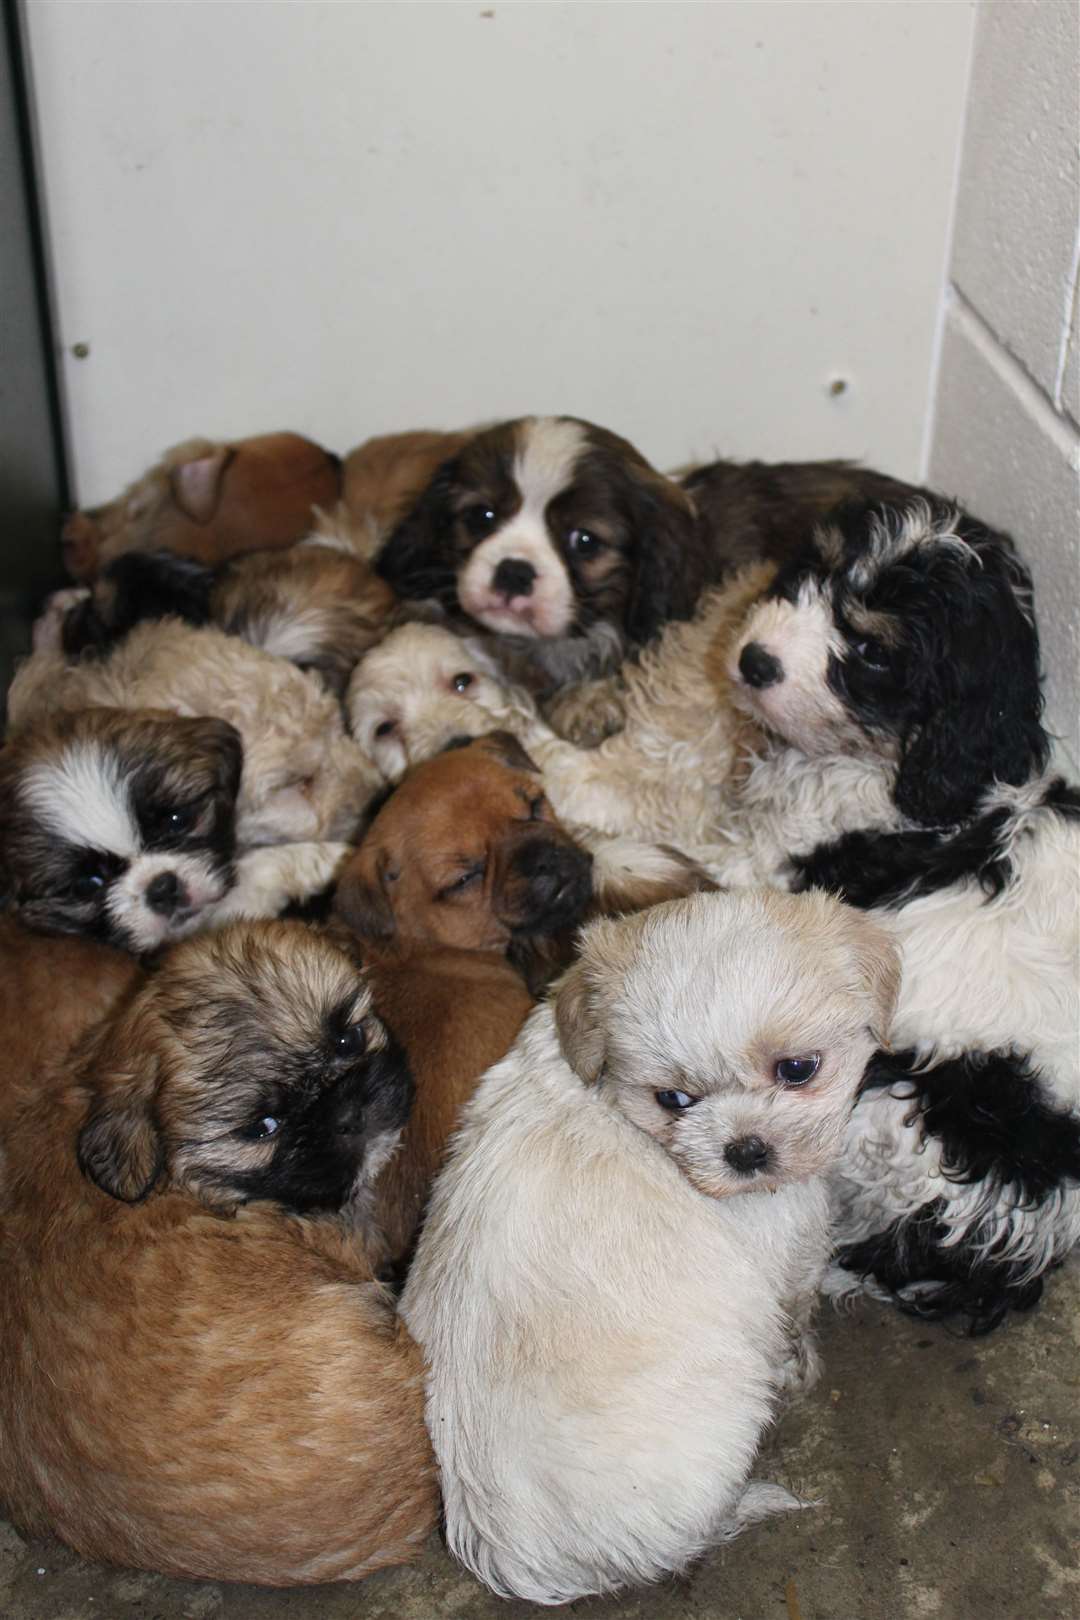 Puppies seized by the Scottish SPCA Special Investigations Unit. Picture: Scottish SPCA